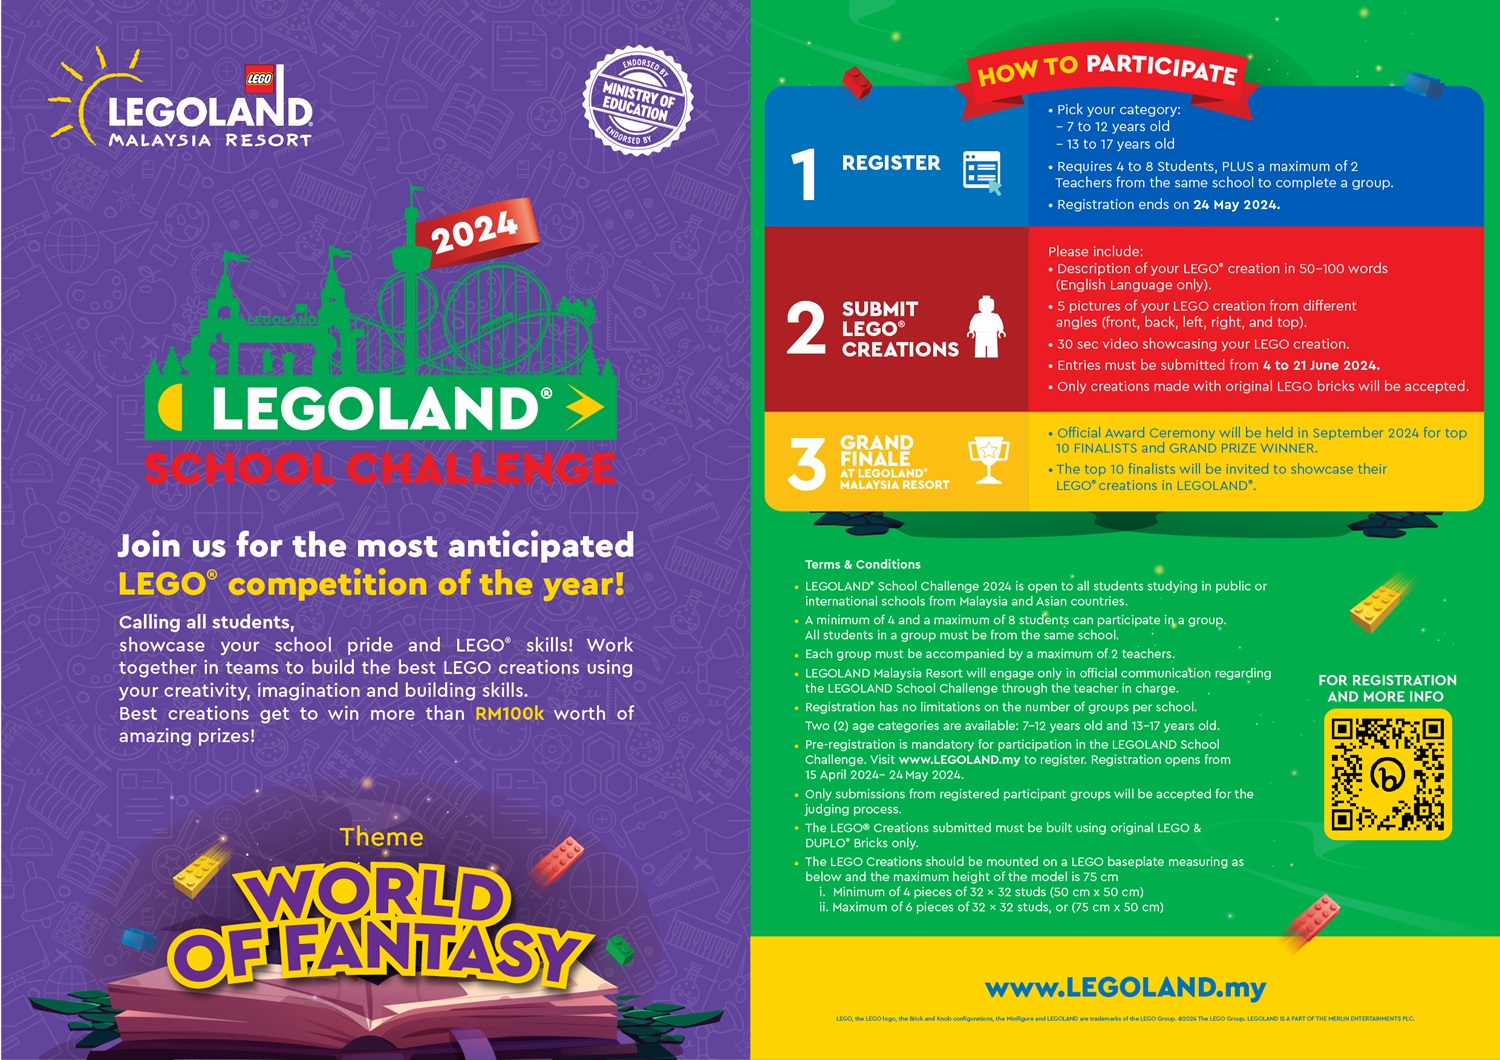 LEGOLAND® School Challenge 2024 Expands Across Asia & Opens for Registration on April 15th